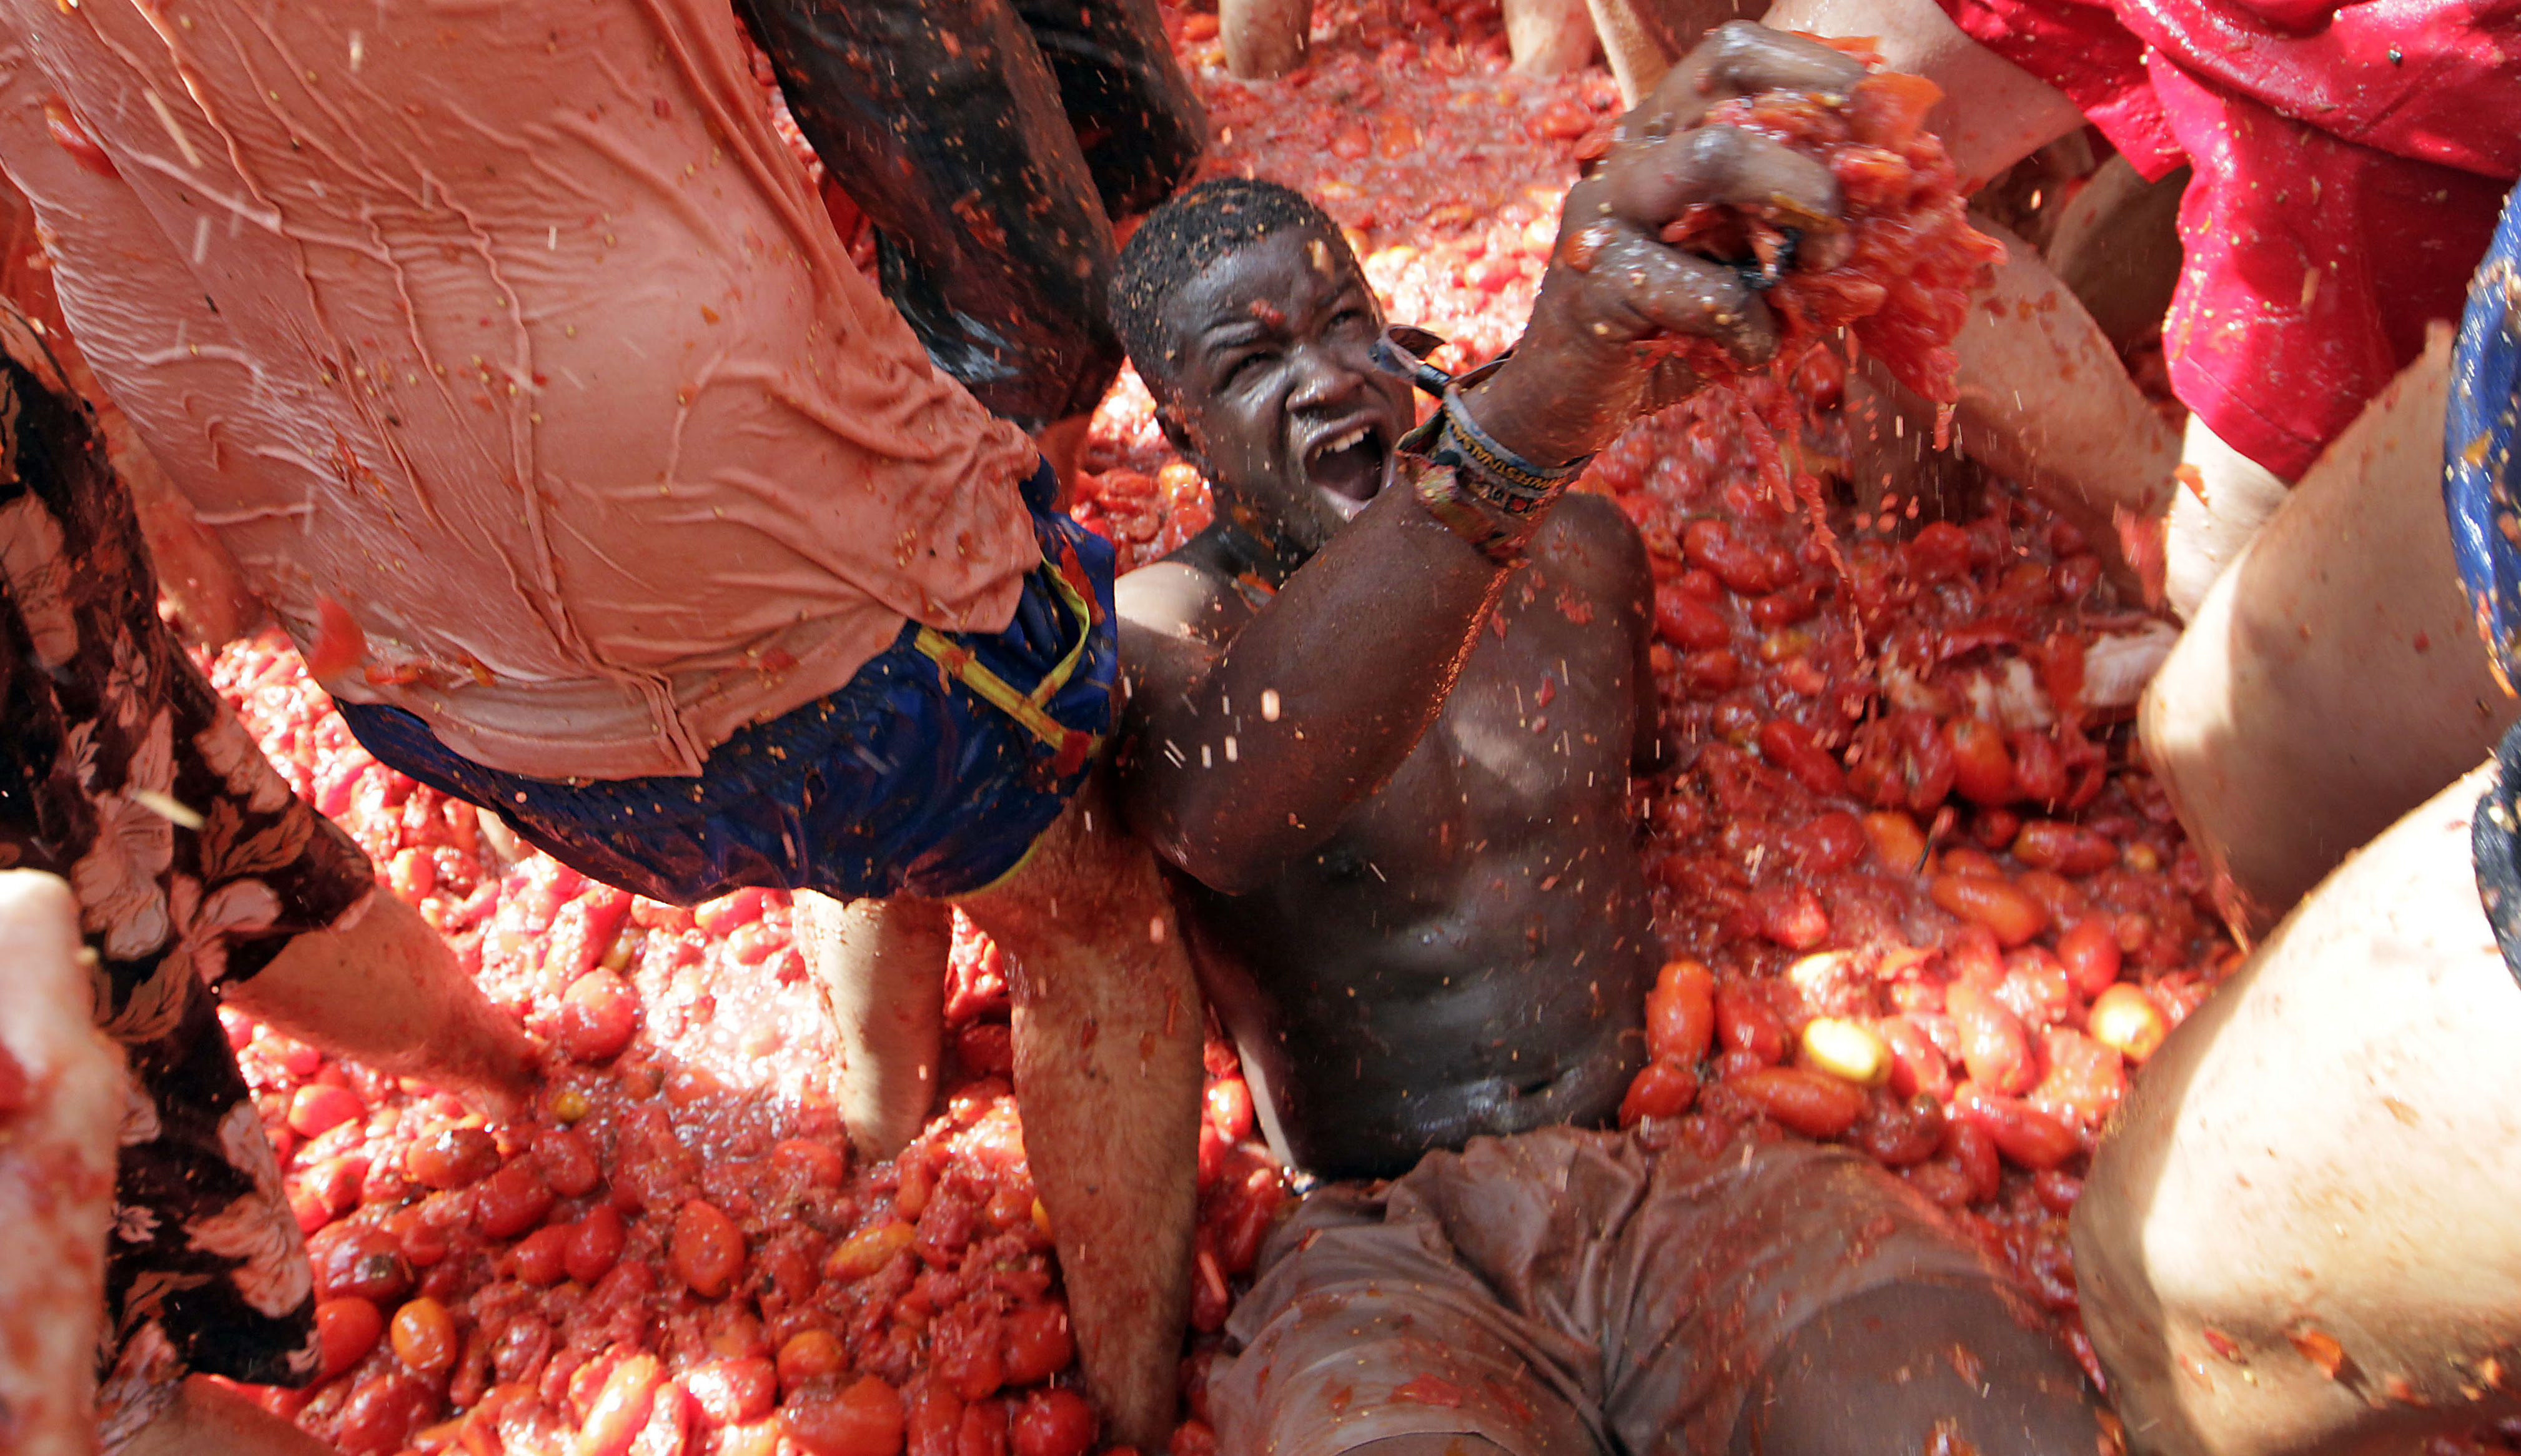 Crowds of people throw tomatoes at each other, during the annual "Tomatina", tomato fight fiesta, in the village of Bunol, 50 kilometers outside Valencia, Spain